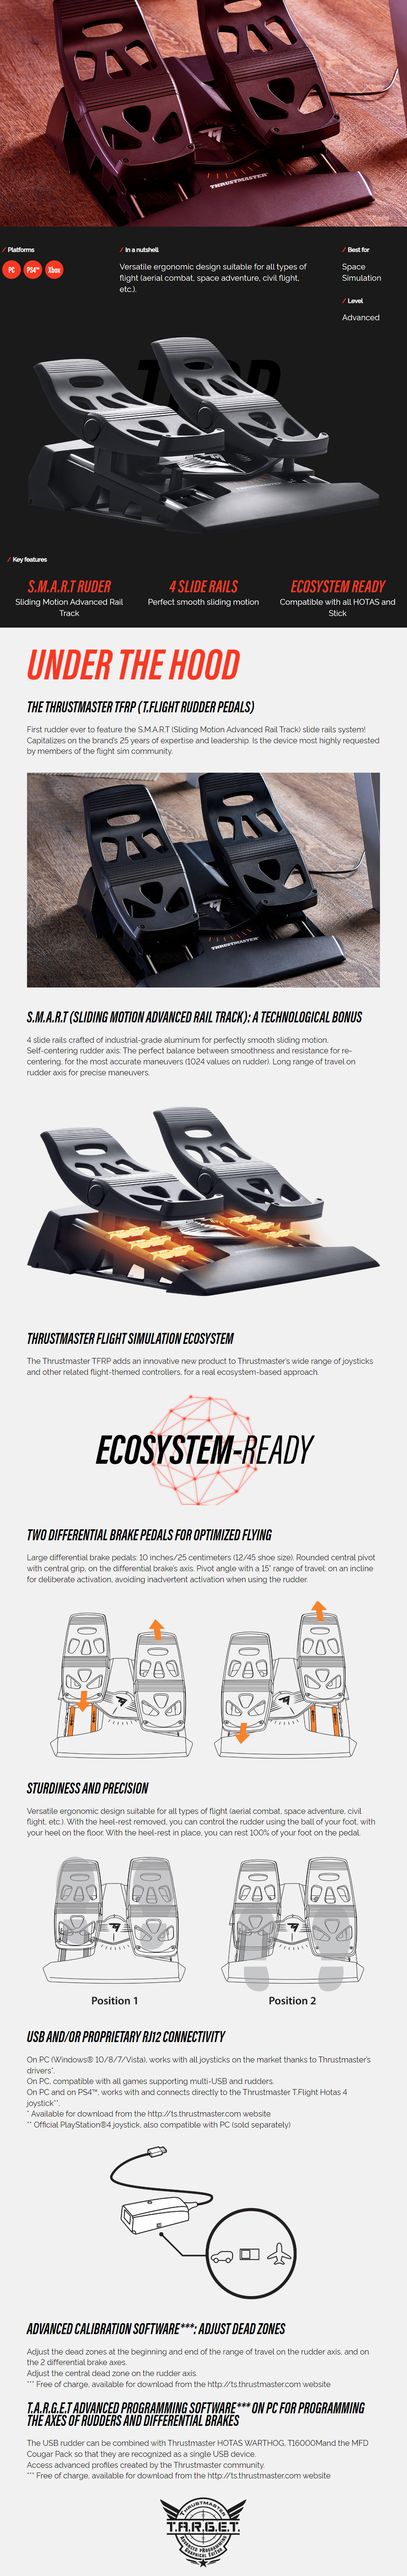 Controllers-Thrustmaster-Flight-Rudder-Pedals-For-PC-and-PS4-1